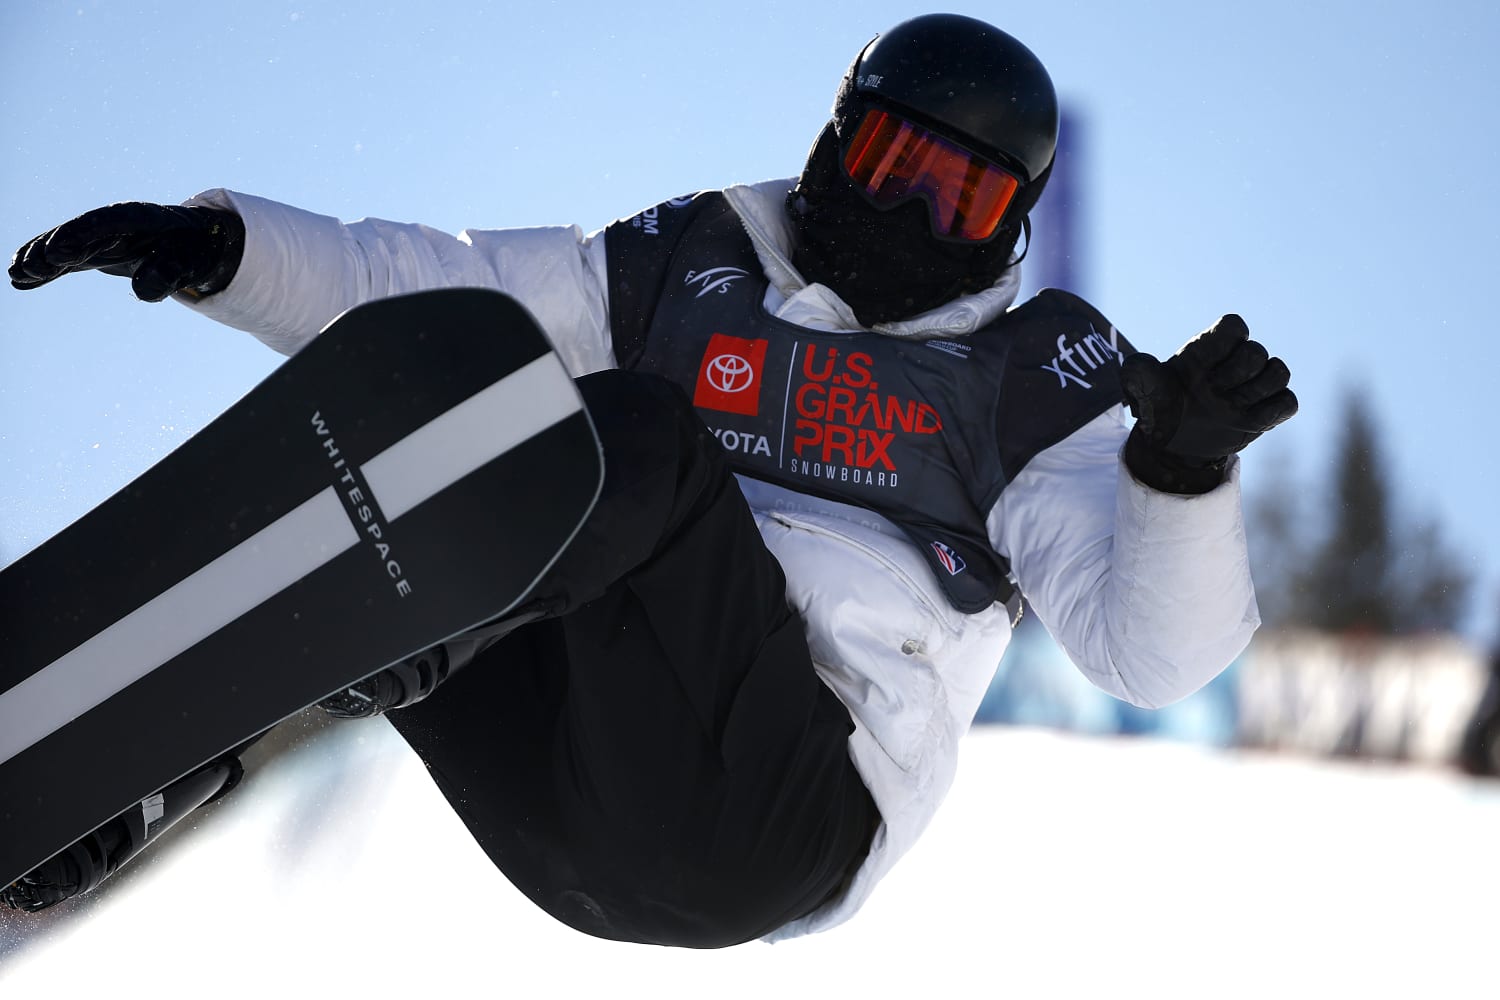 Shaun White's competitive snowboarding career is over. What's next?